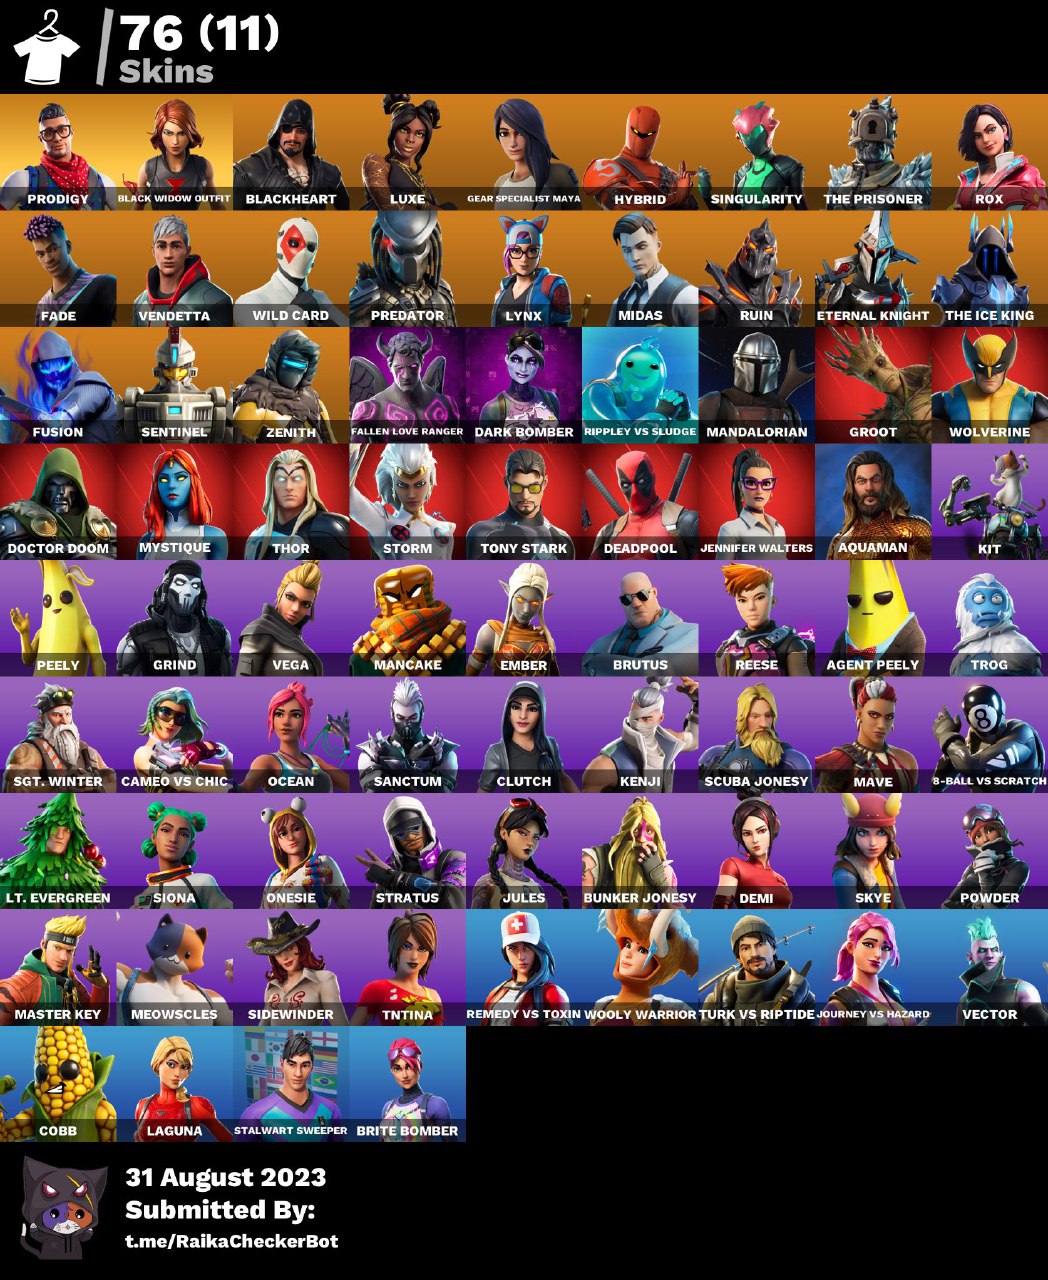 76 skins (can link all platform) | Black Widow Outfit | Tabulator | Take The Elf | Widow’s Pirouette | Heartspan | Blackheart | Luxe Prodigy